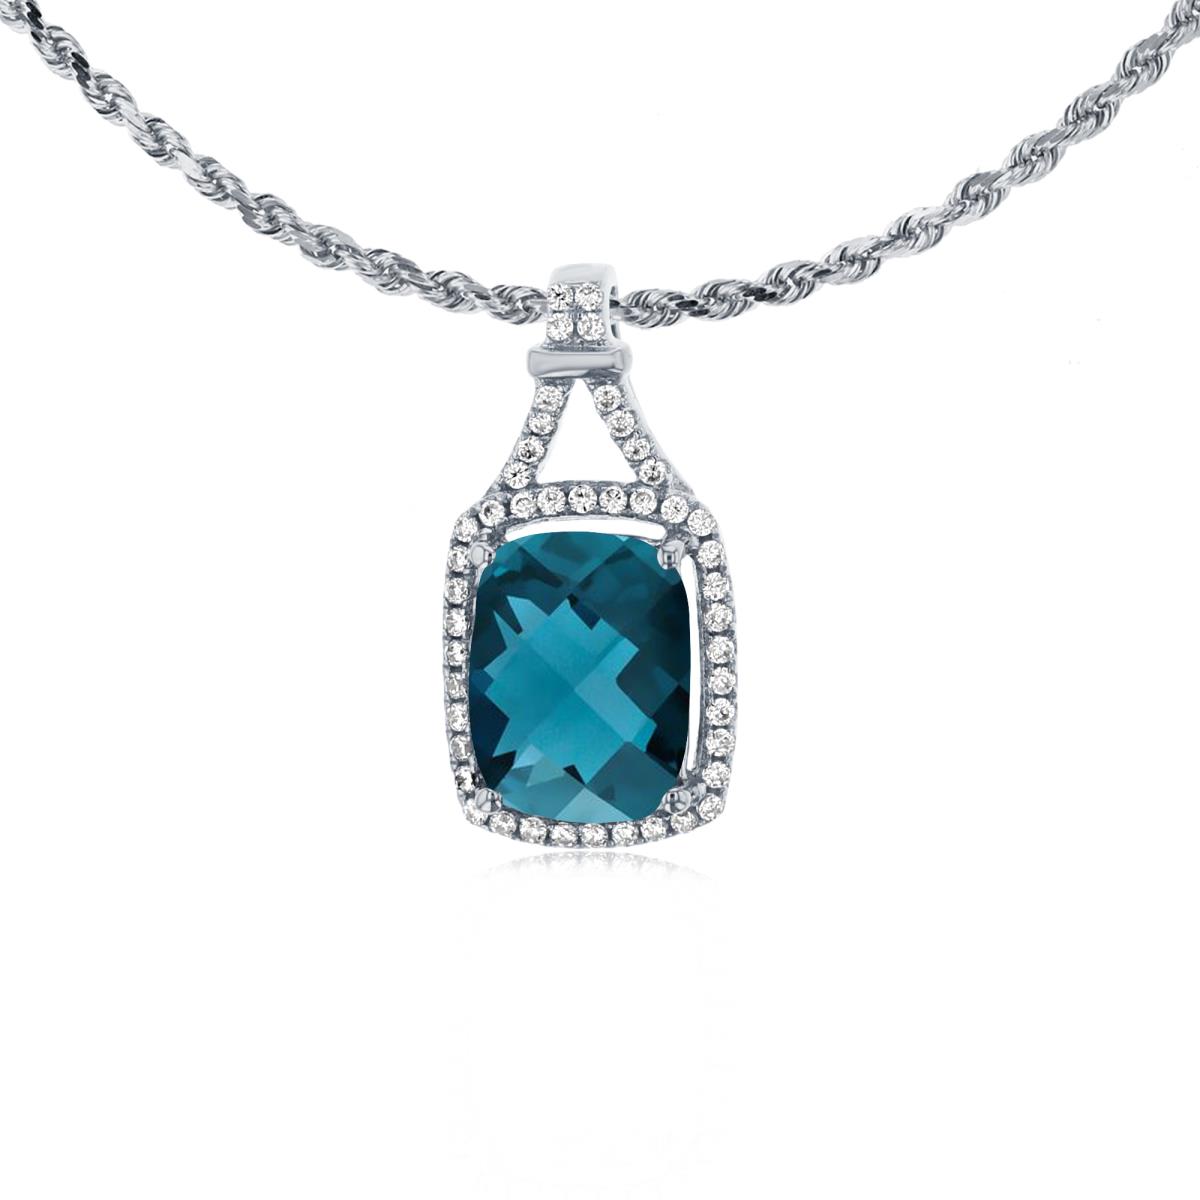 10K White Gold 8x6mm Cushion London Blue Topaz & 0.13 CTTW Rd Diamonds Halo 18" Rope Chain Necklace